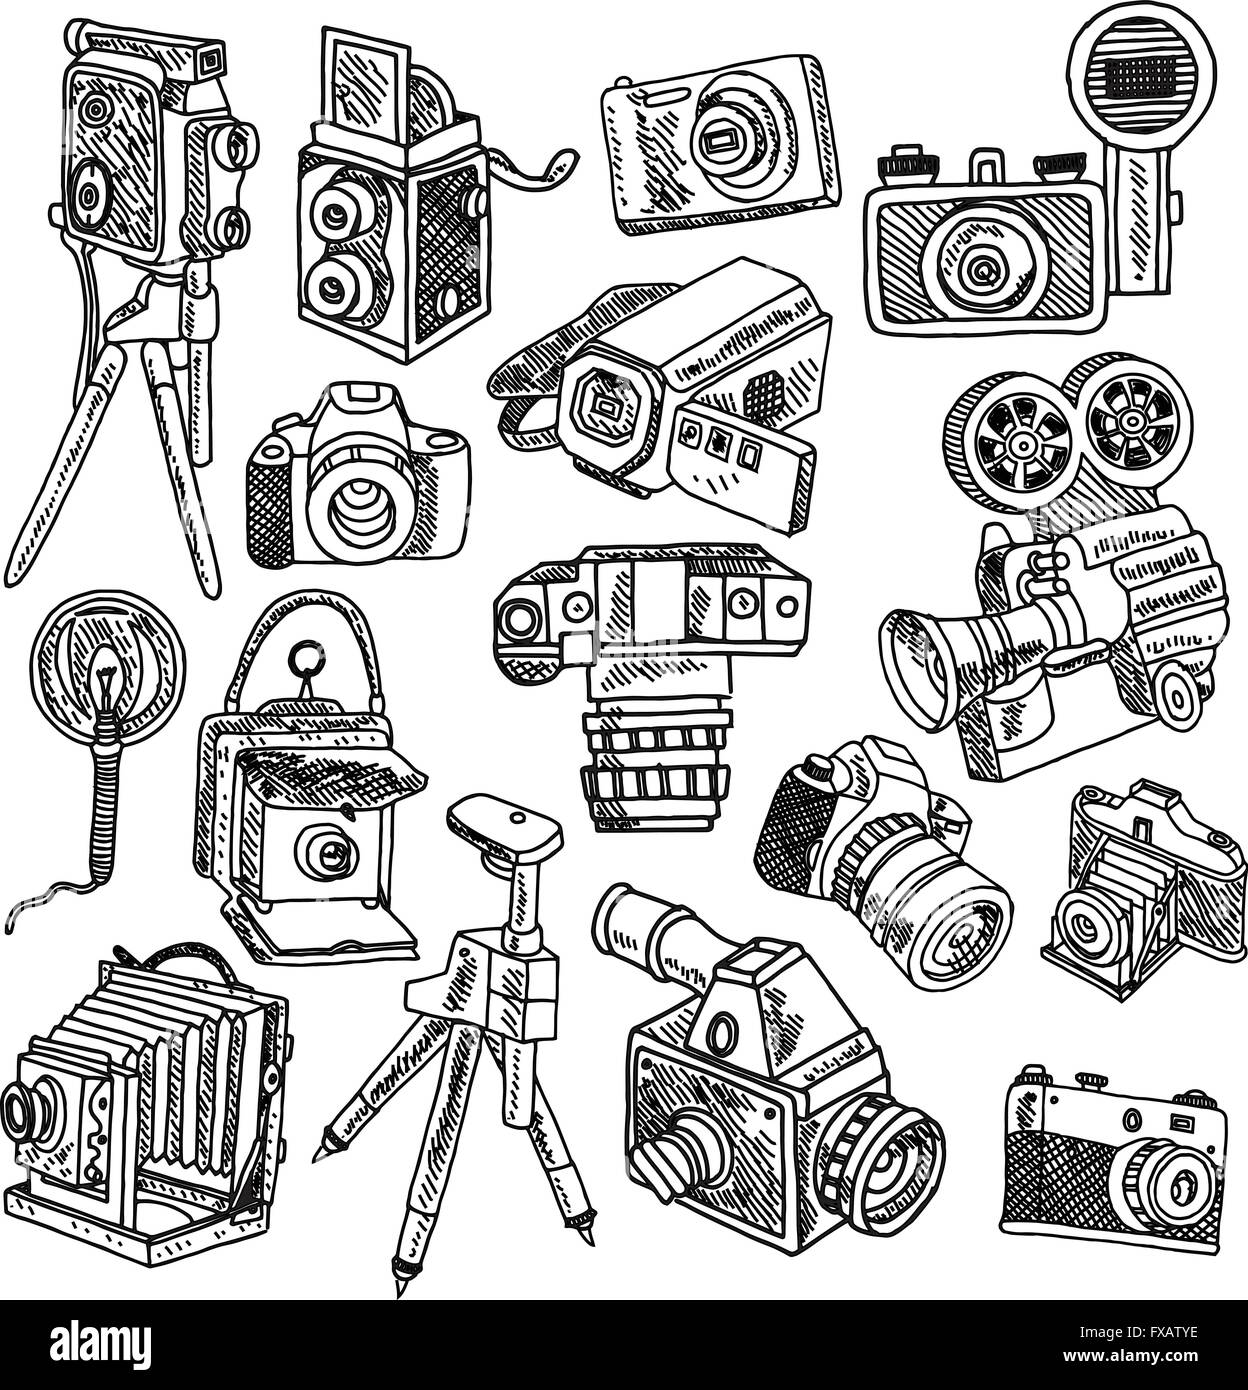 Camera doodle sketch icons set Stock Vector